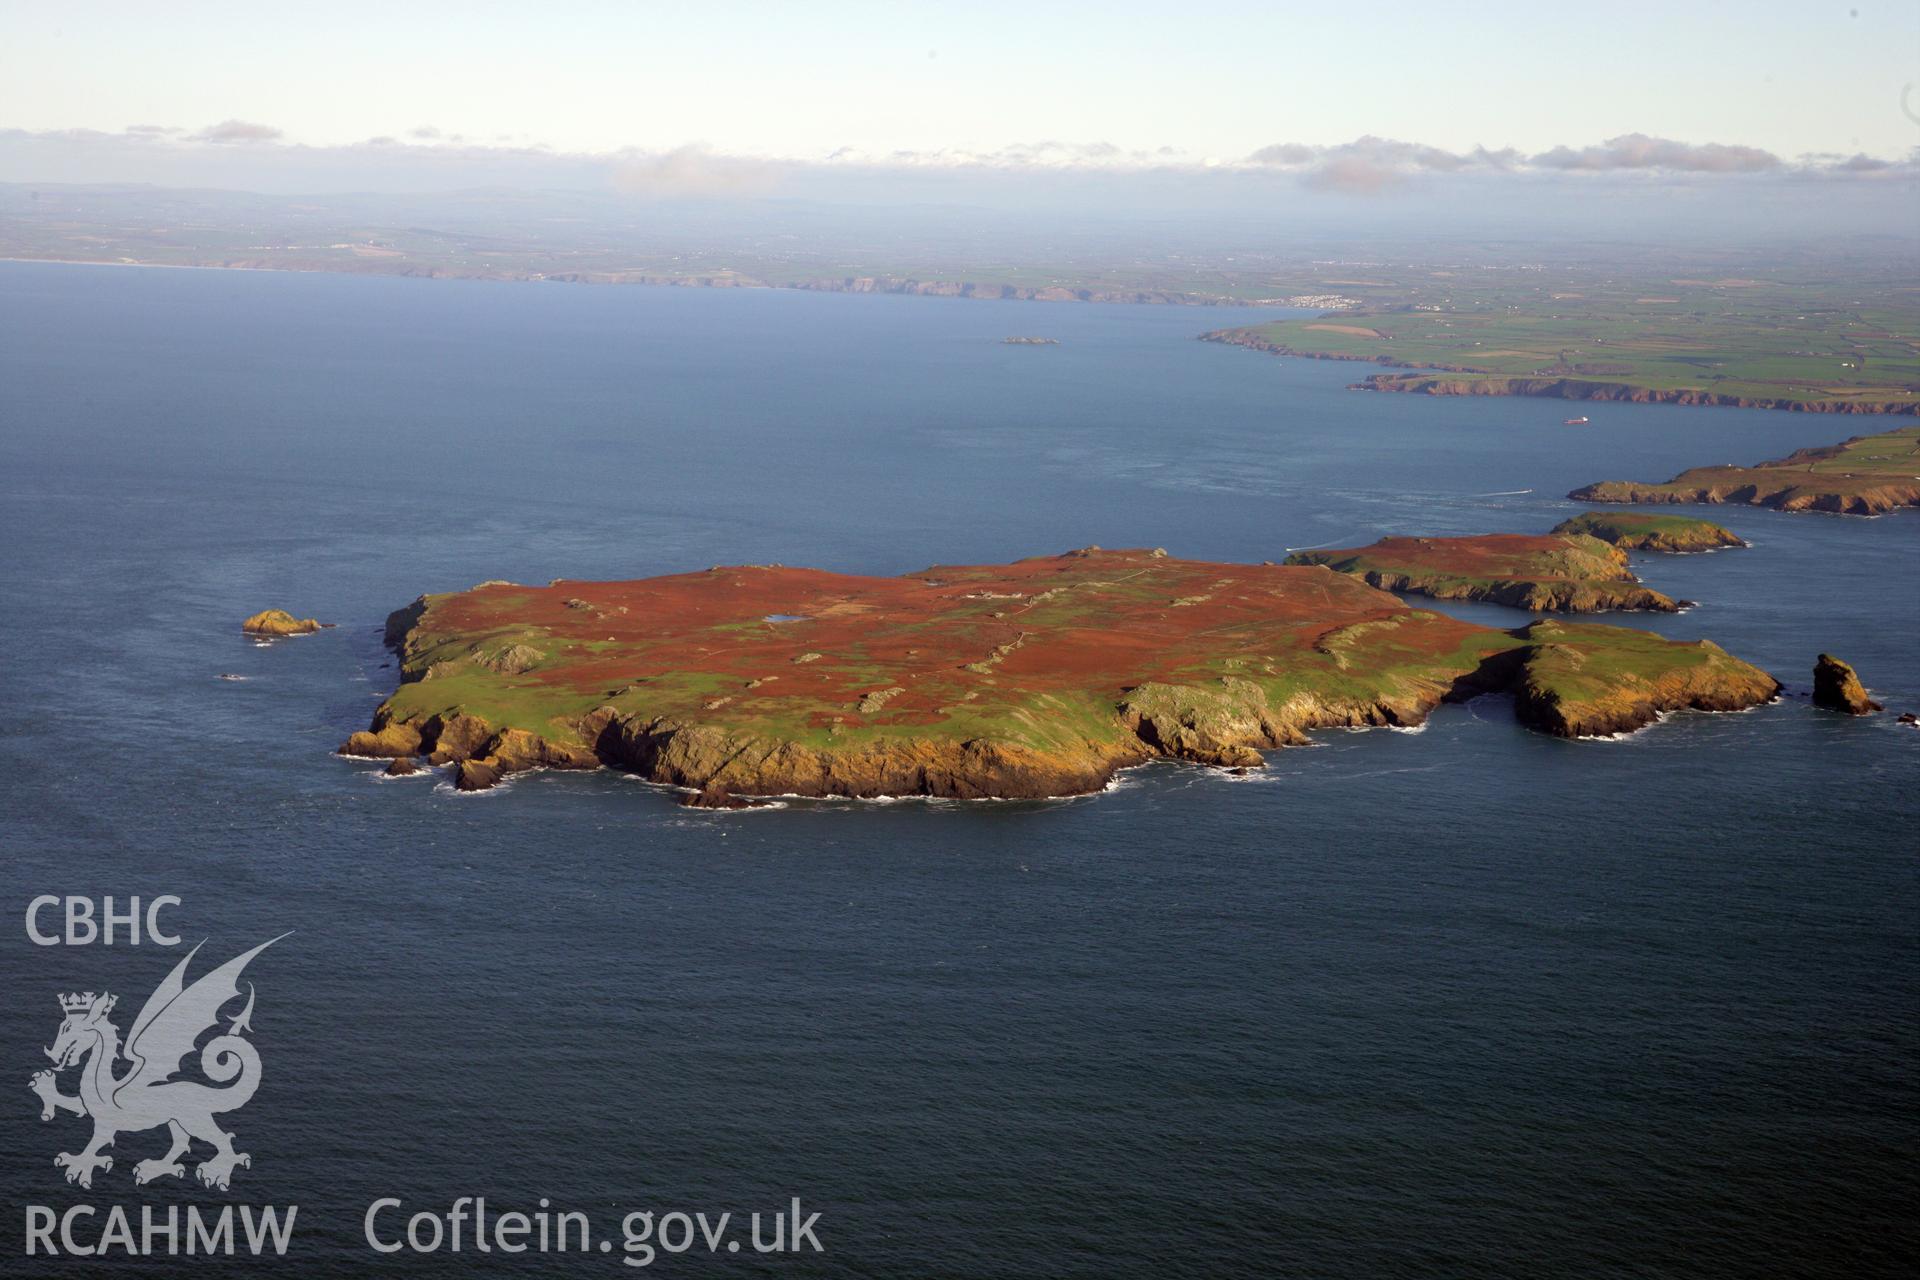 RCAHMW colour oblique photograph of Skokholm Island, viewed from the west. Taken by O. Davies & T. Driver on 22/11/2013.